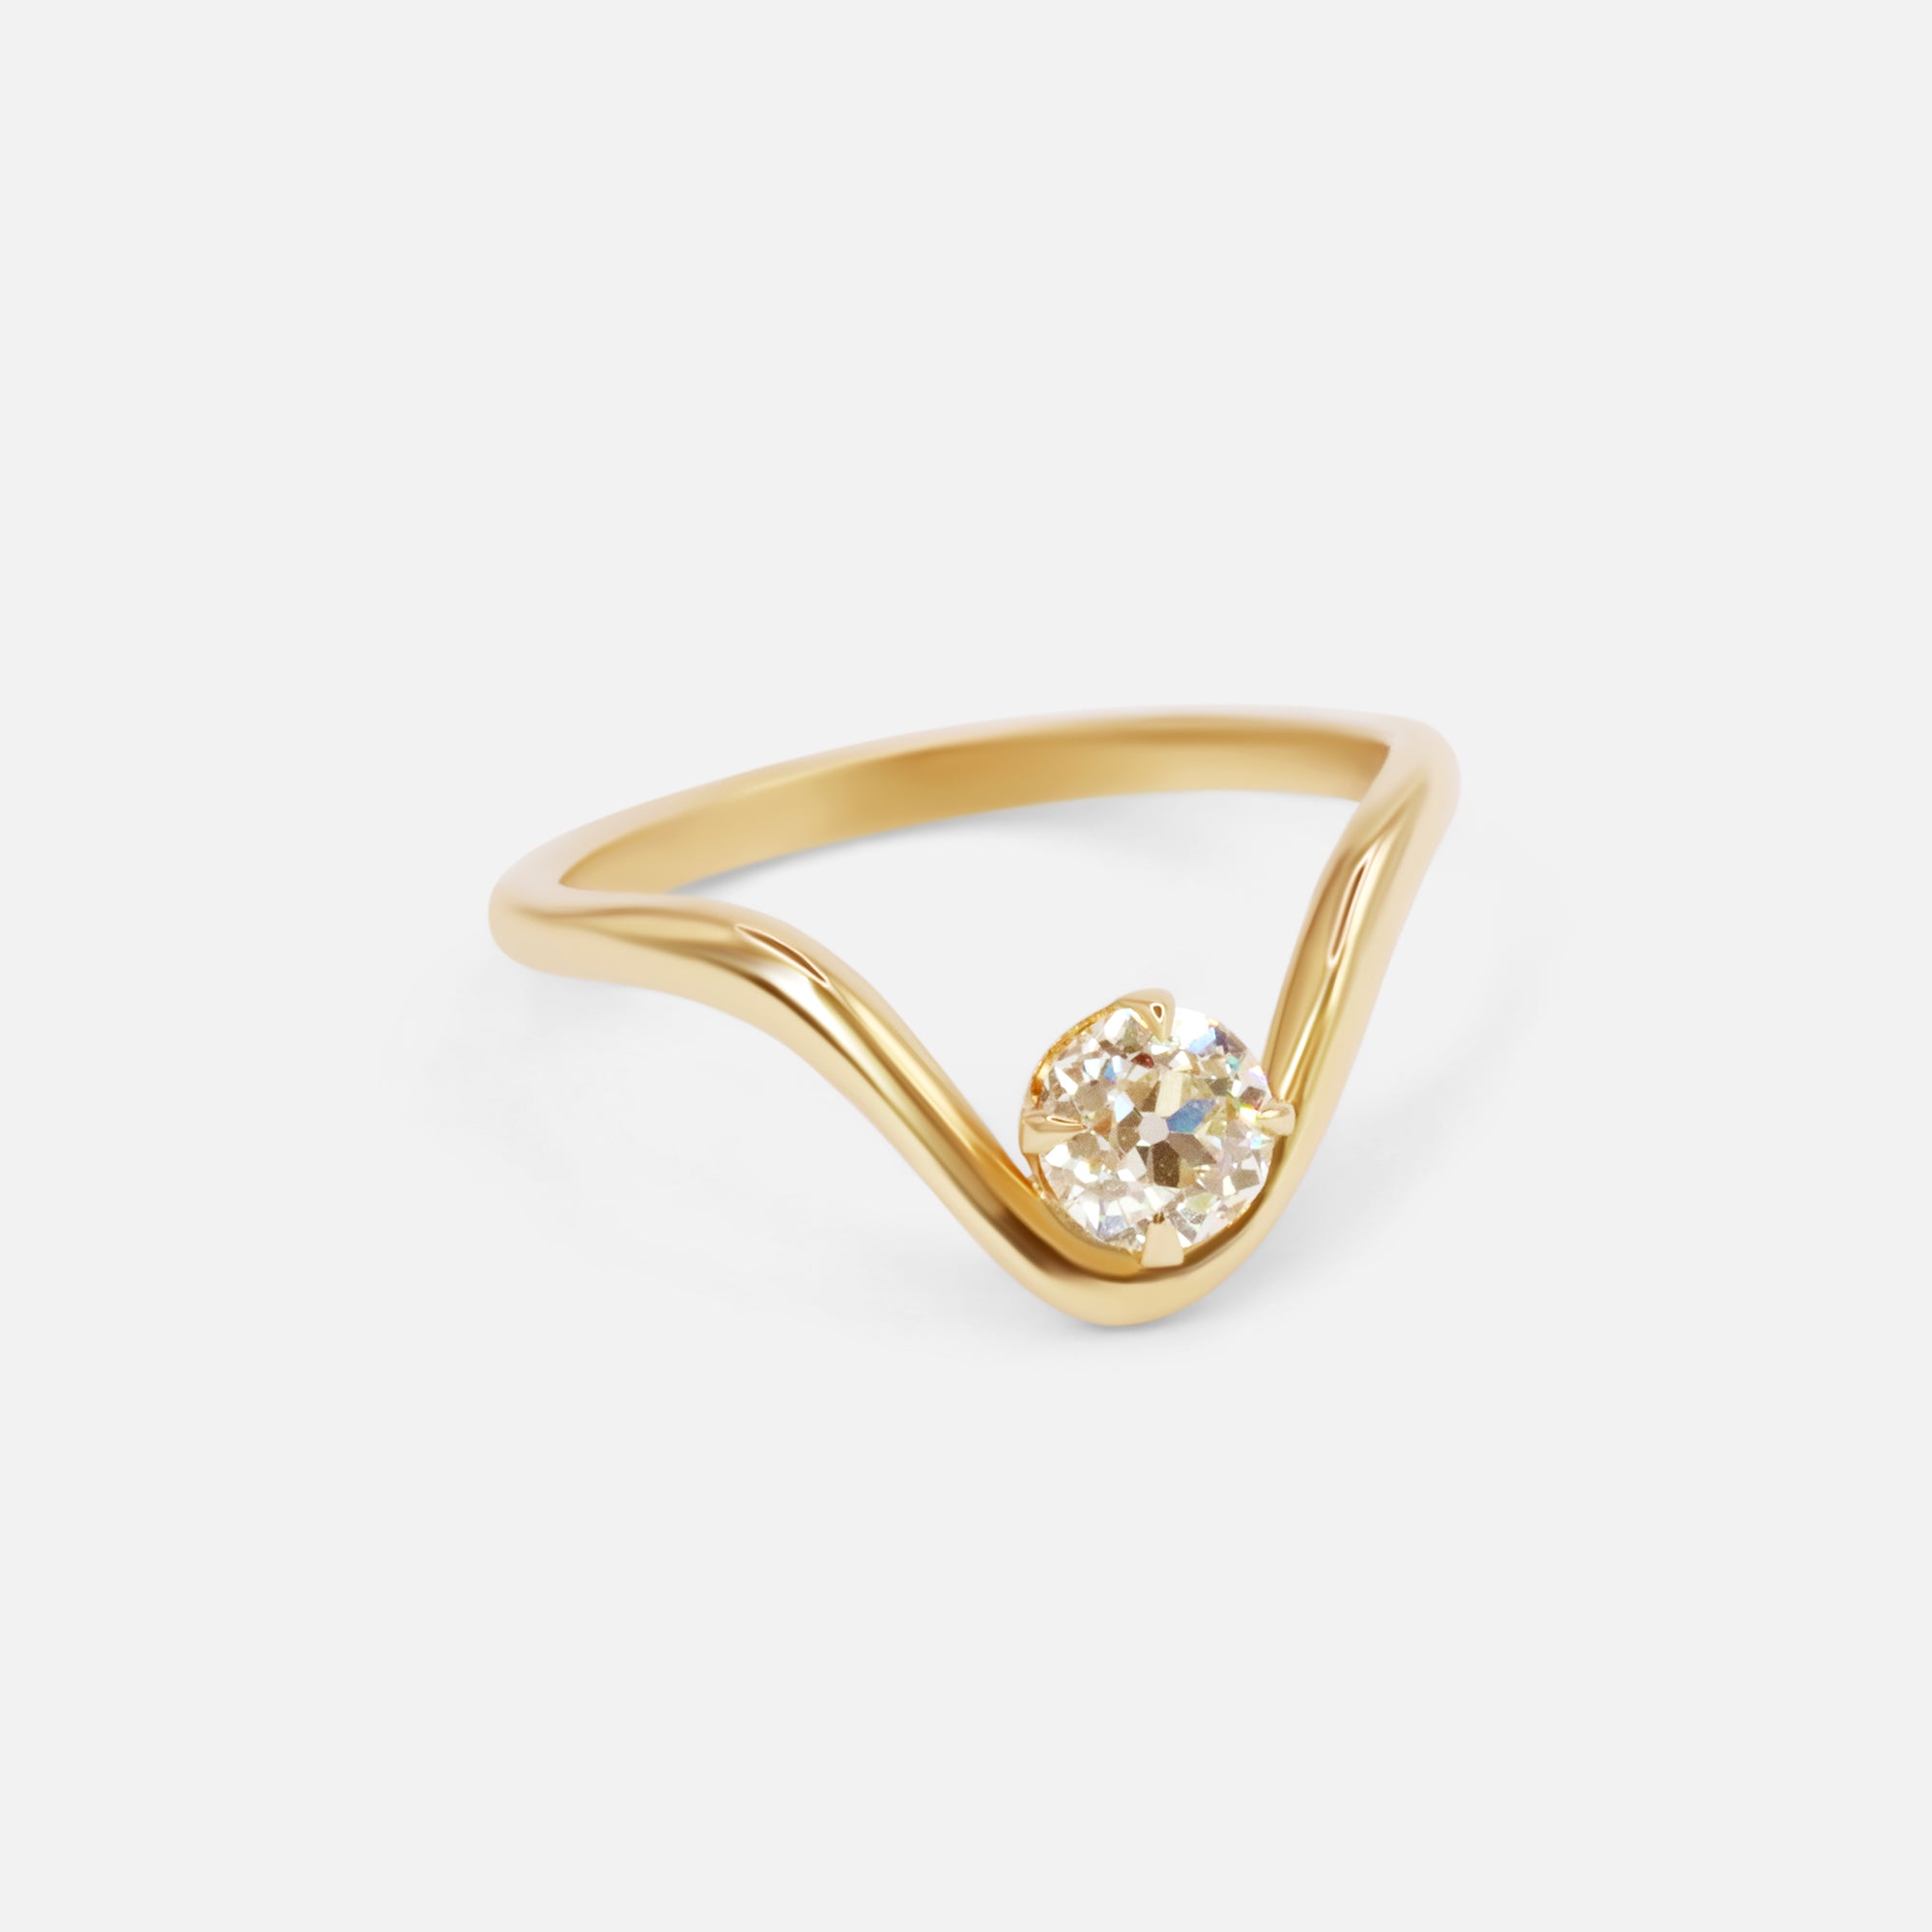 Diamond and Gold Curved Ring By Nishi in Engagement Rings Category